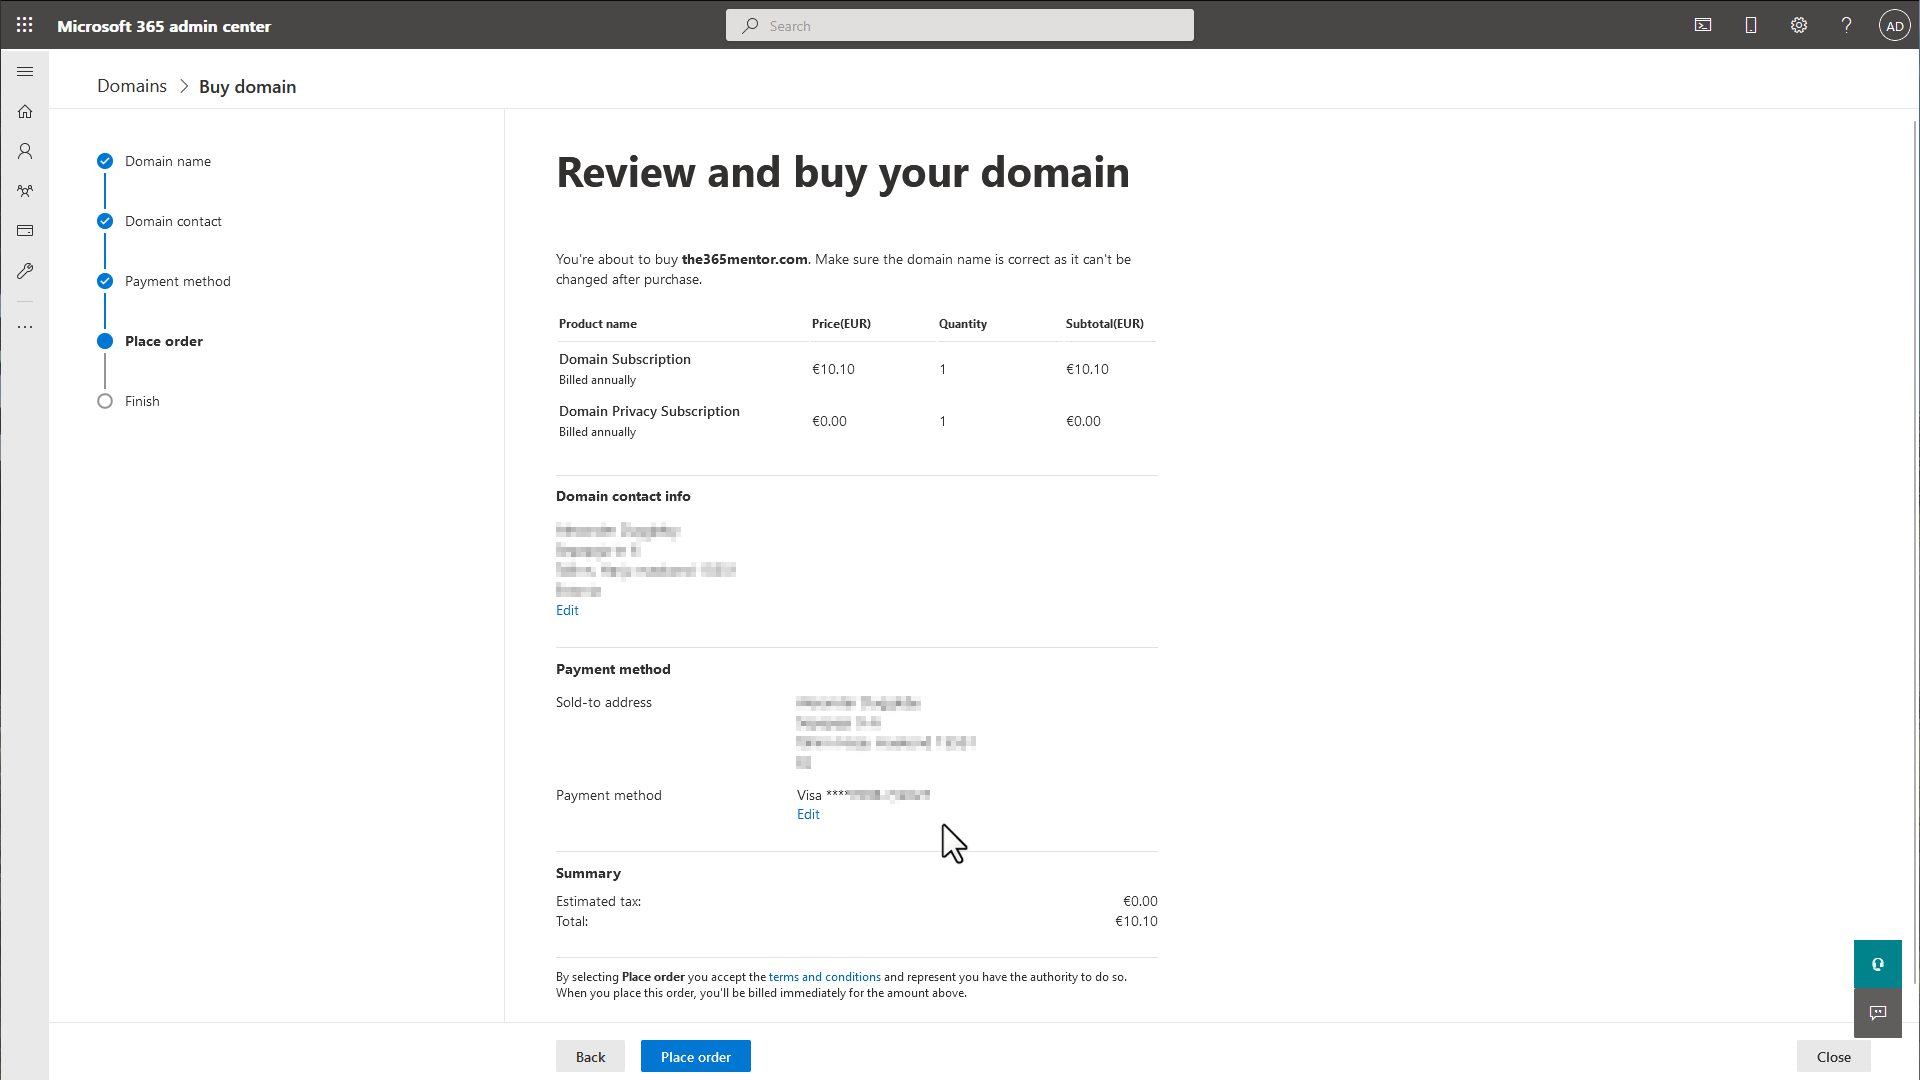 Buying a domain with Microsoft 365 - Order summary